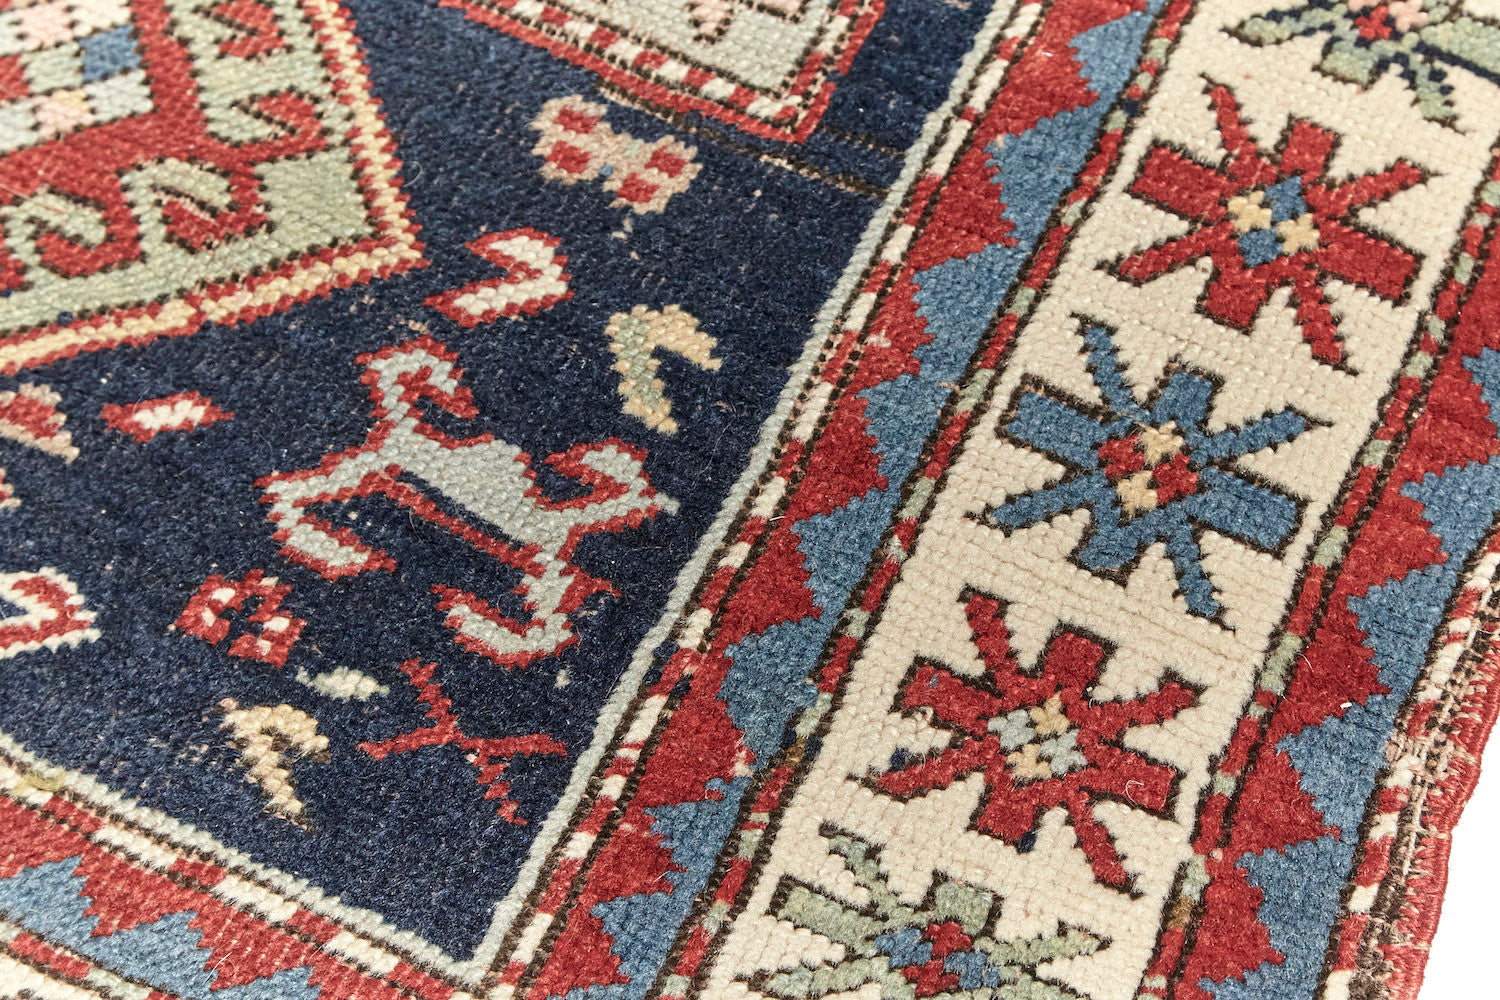 Antique hand woven Kazak Persian rug with dark blue base, blue and pale green diamonds across center with a cream and red border, featuring red, pale green and blue star-like shapes. Perfect for bedroom, living room dining room or kitchen. Available from King Kennedy Rugs Los Angeles.